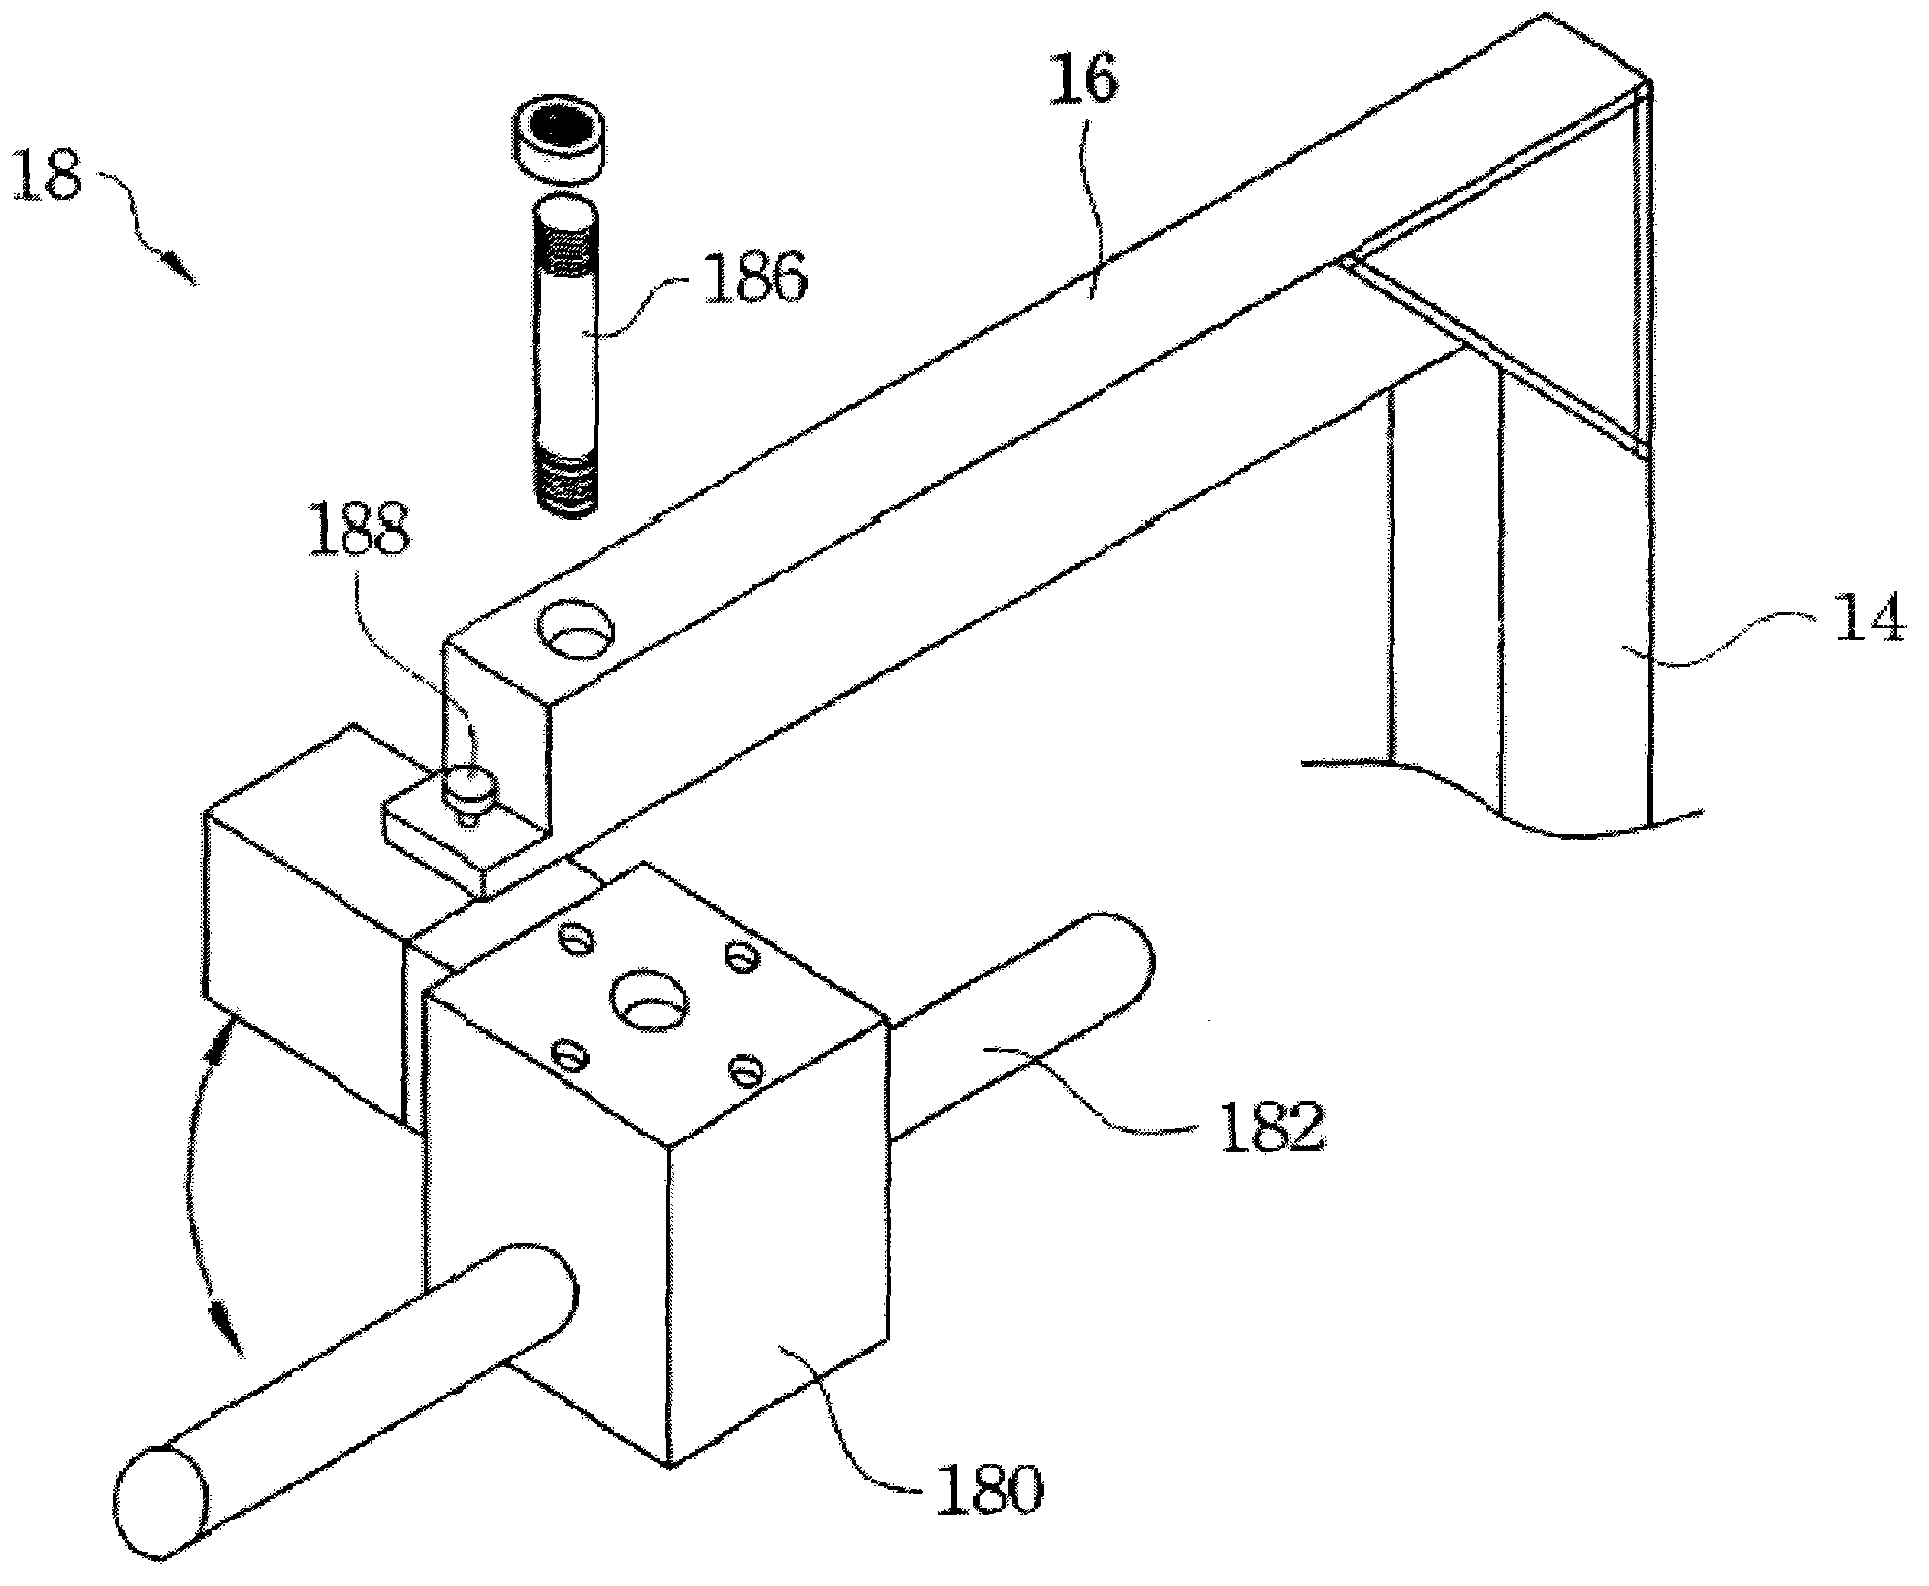 Device for turning over and transferring the patient